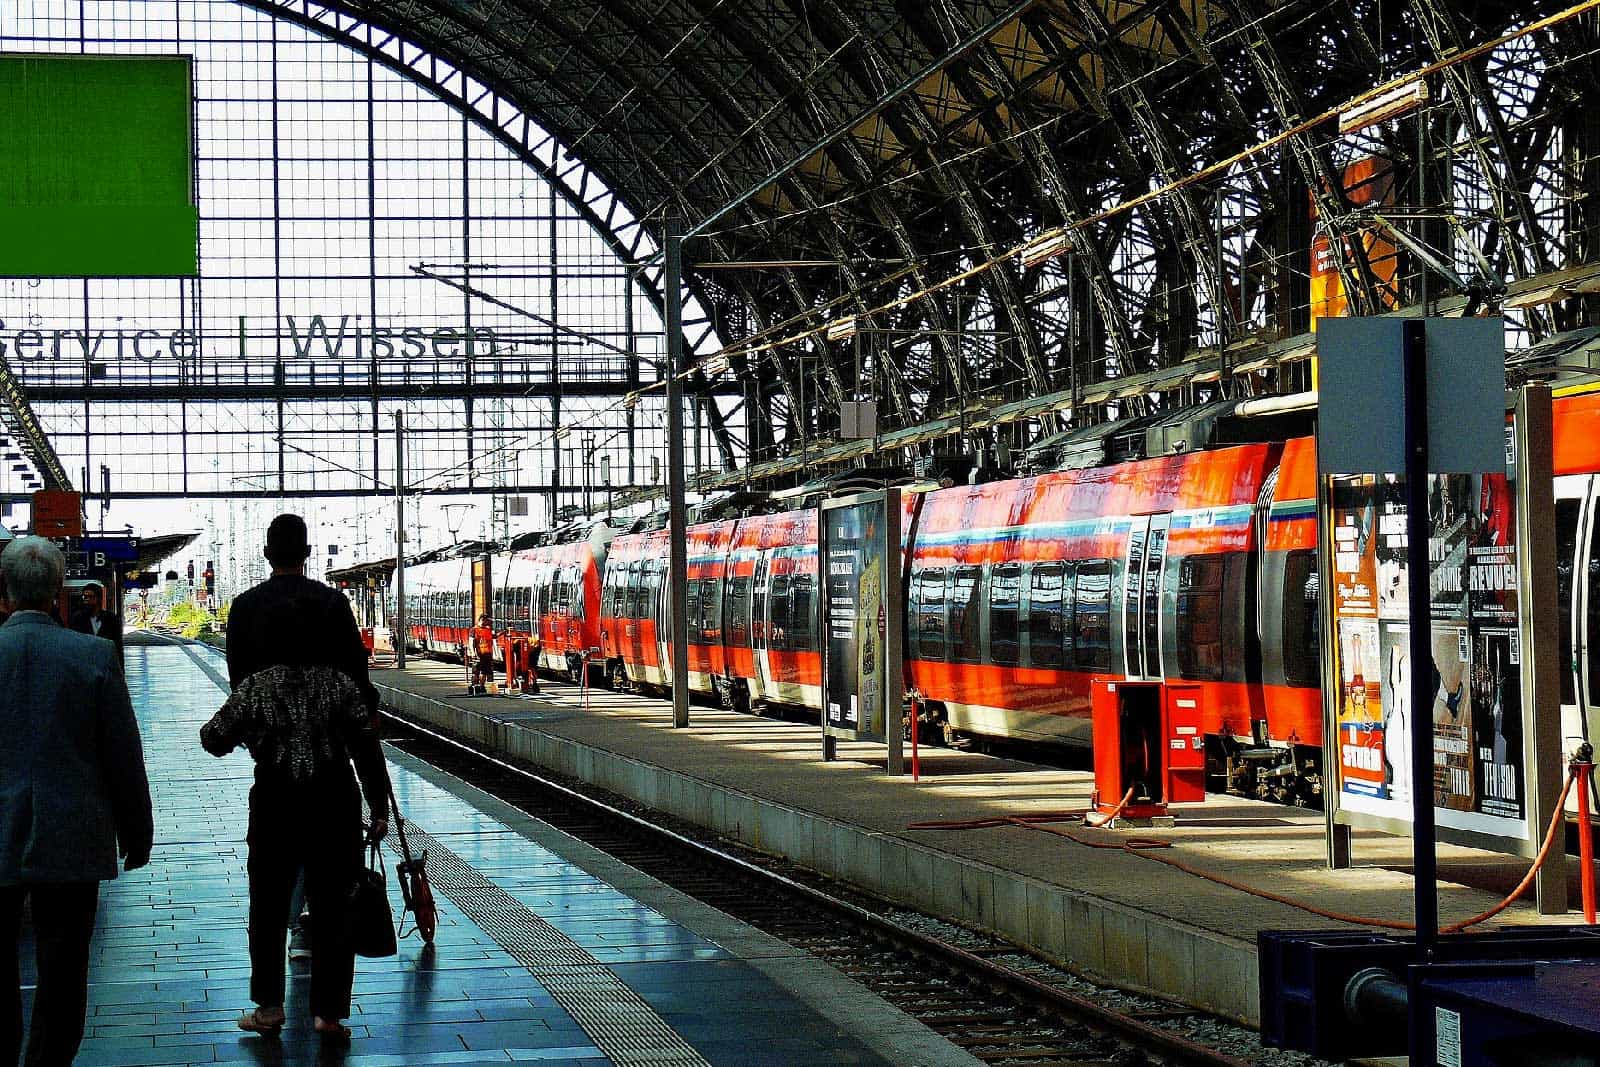 How to plan a railway journey across Europe